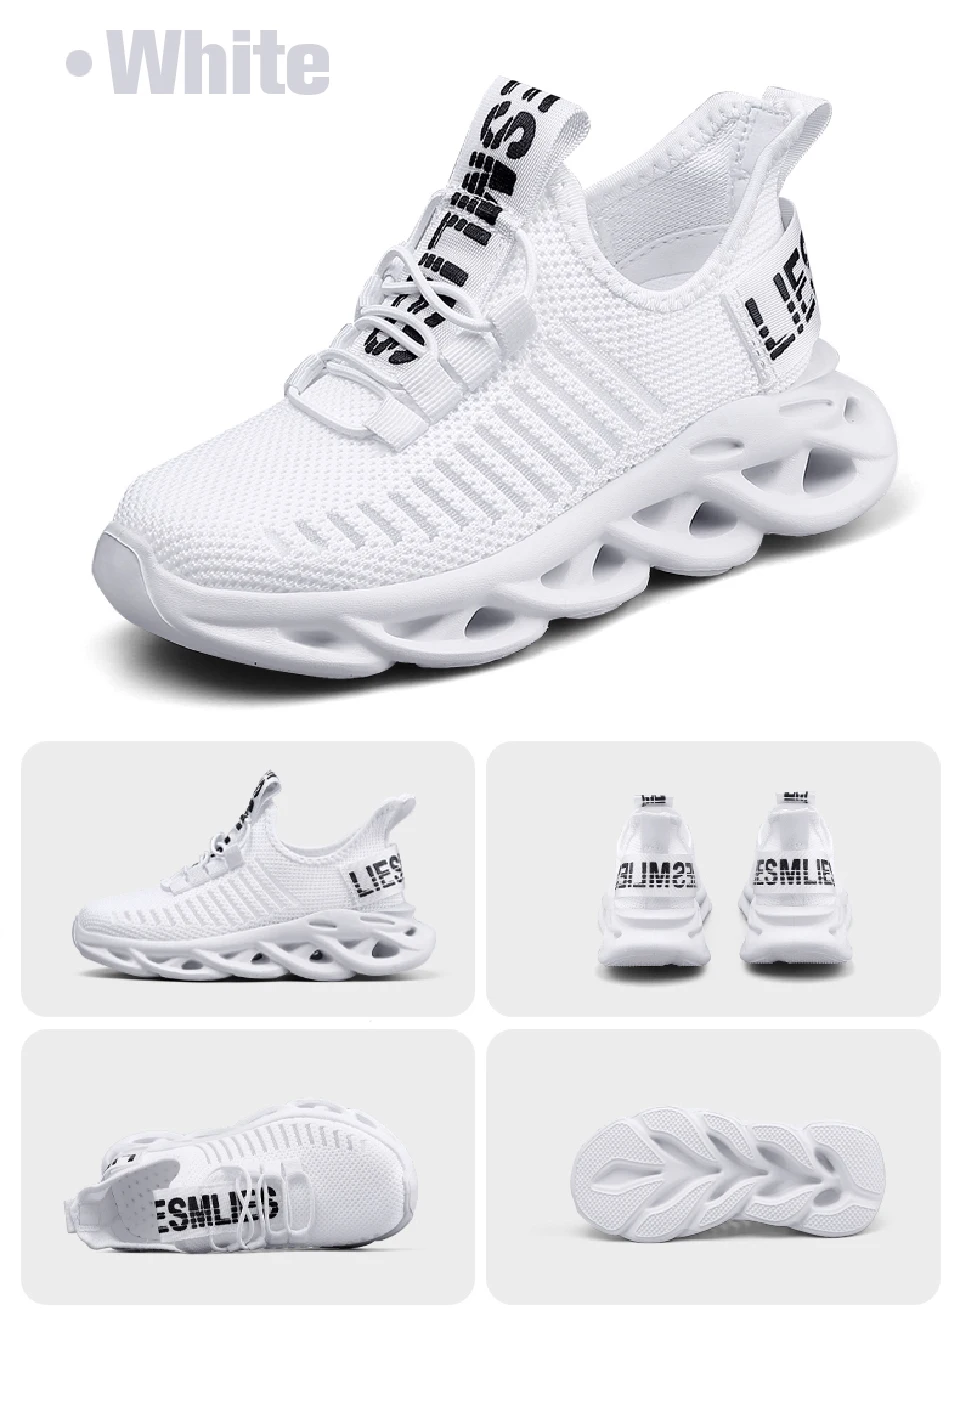 children's shoes for sale Summer Sport Boys Casual Shoes Breathable Mesh Kids Sneakers Children Platform Running Shoes for Girls Lightweight Sneakers New Sandal for girl